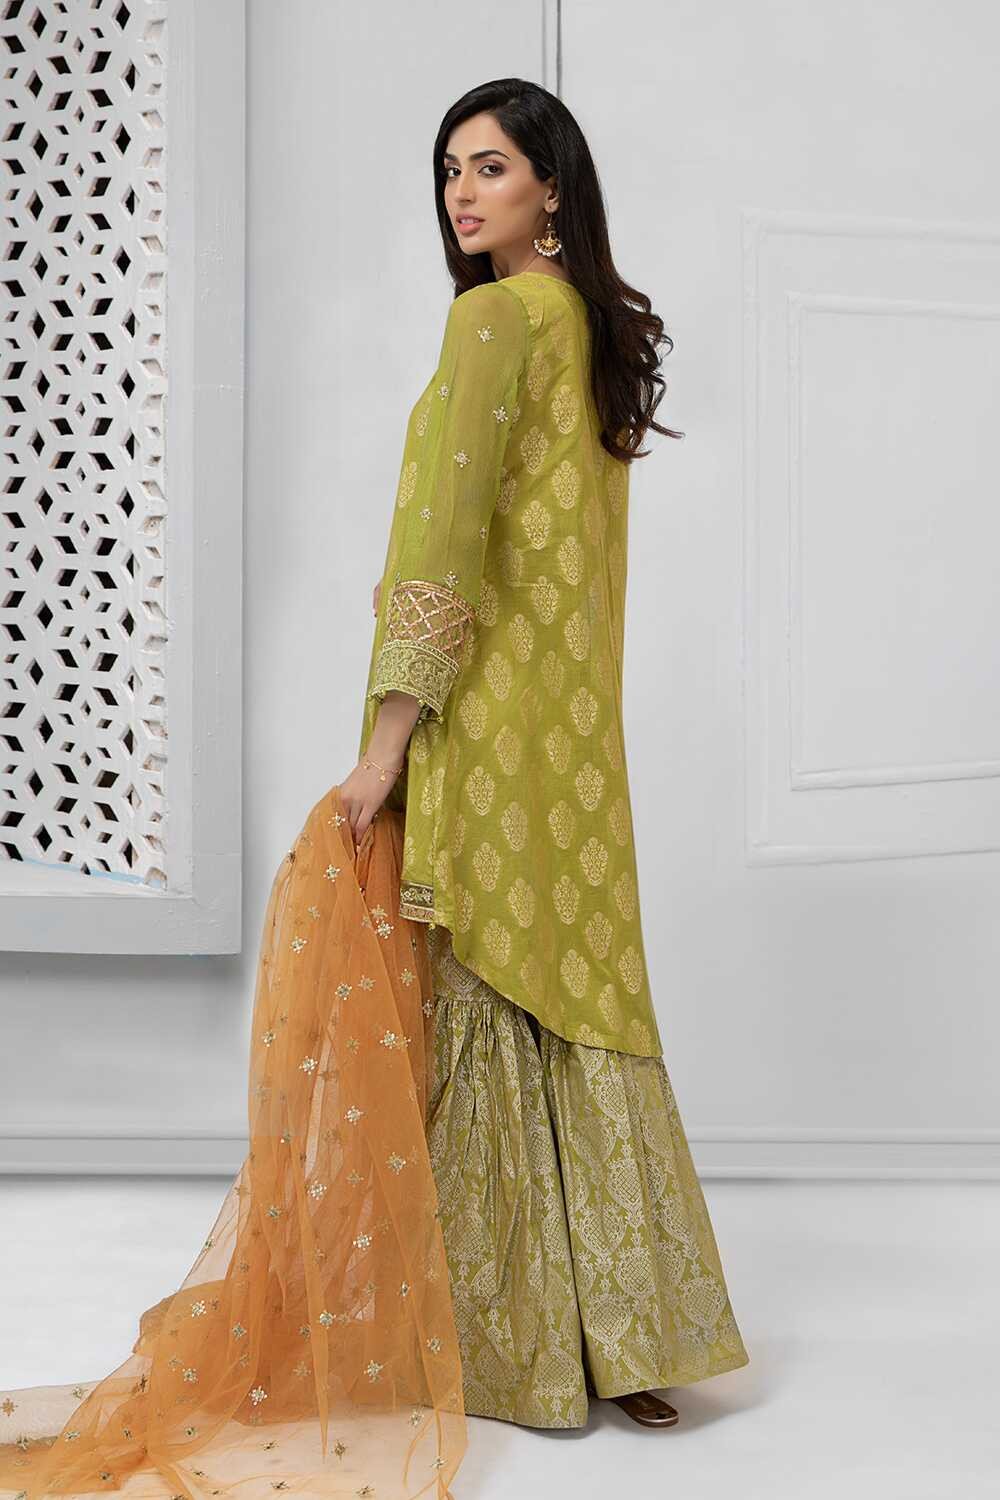 /2019/07/mariab-eid-collection-suit-olive-green-dw-2232-image2.jpeg